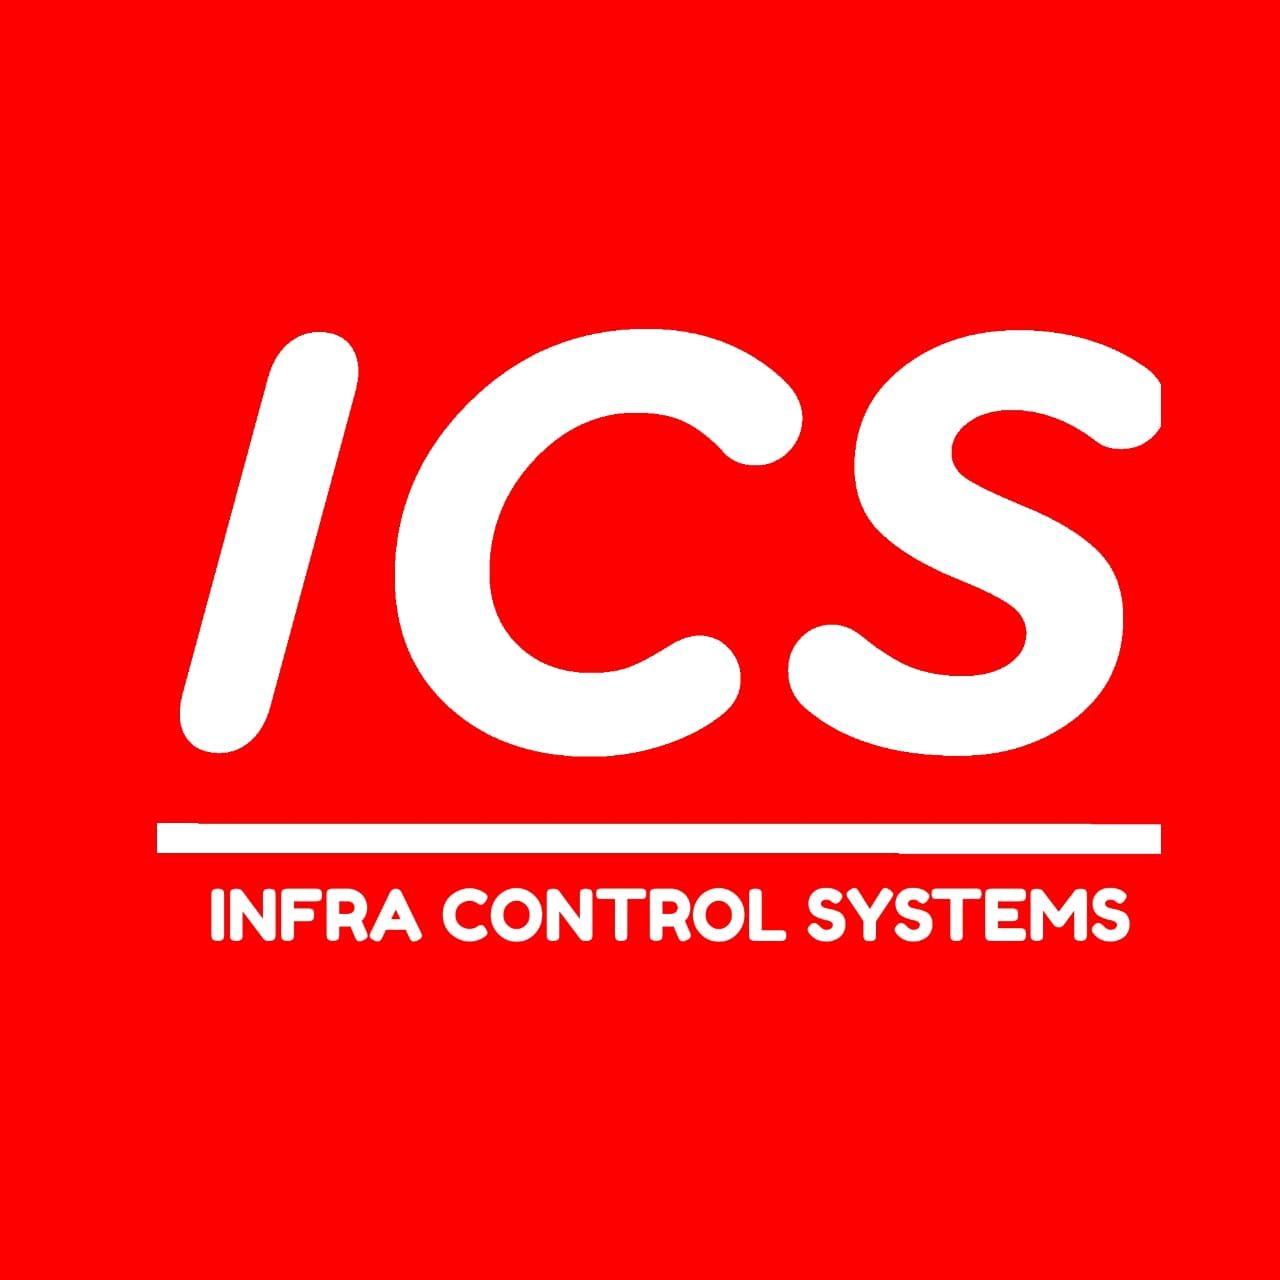 Infra Control Systems